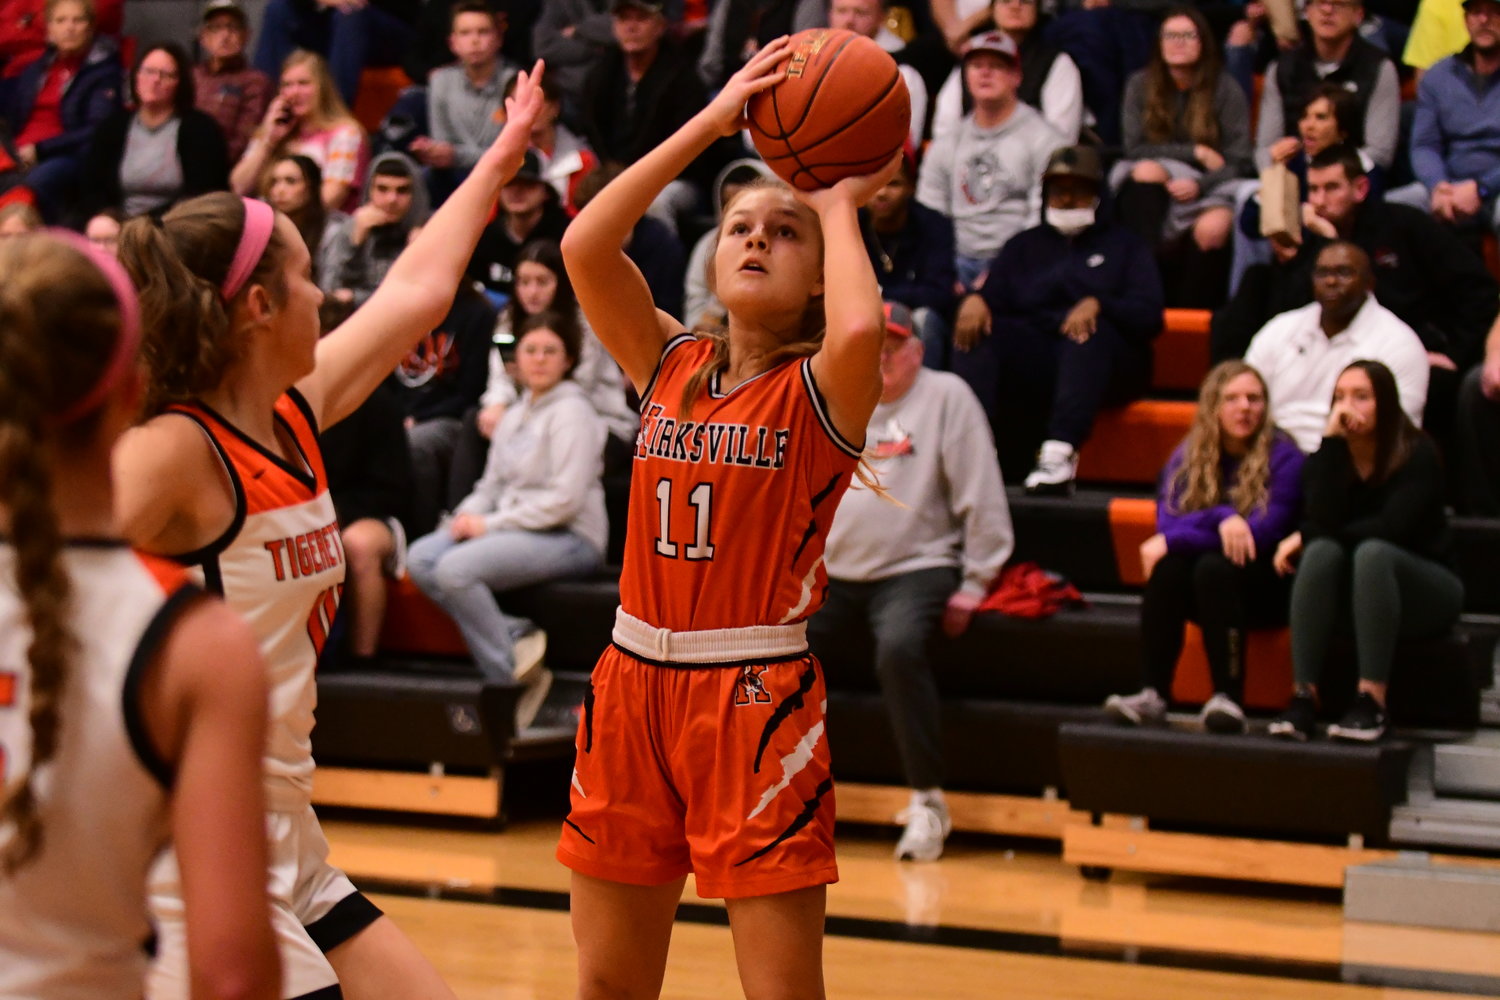 Action from the girls title game at the Macon Tournament, contested between Kirksville and Macon on Jan. 22.